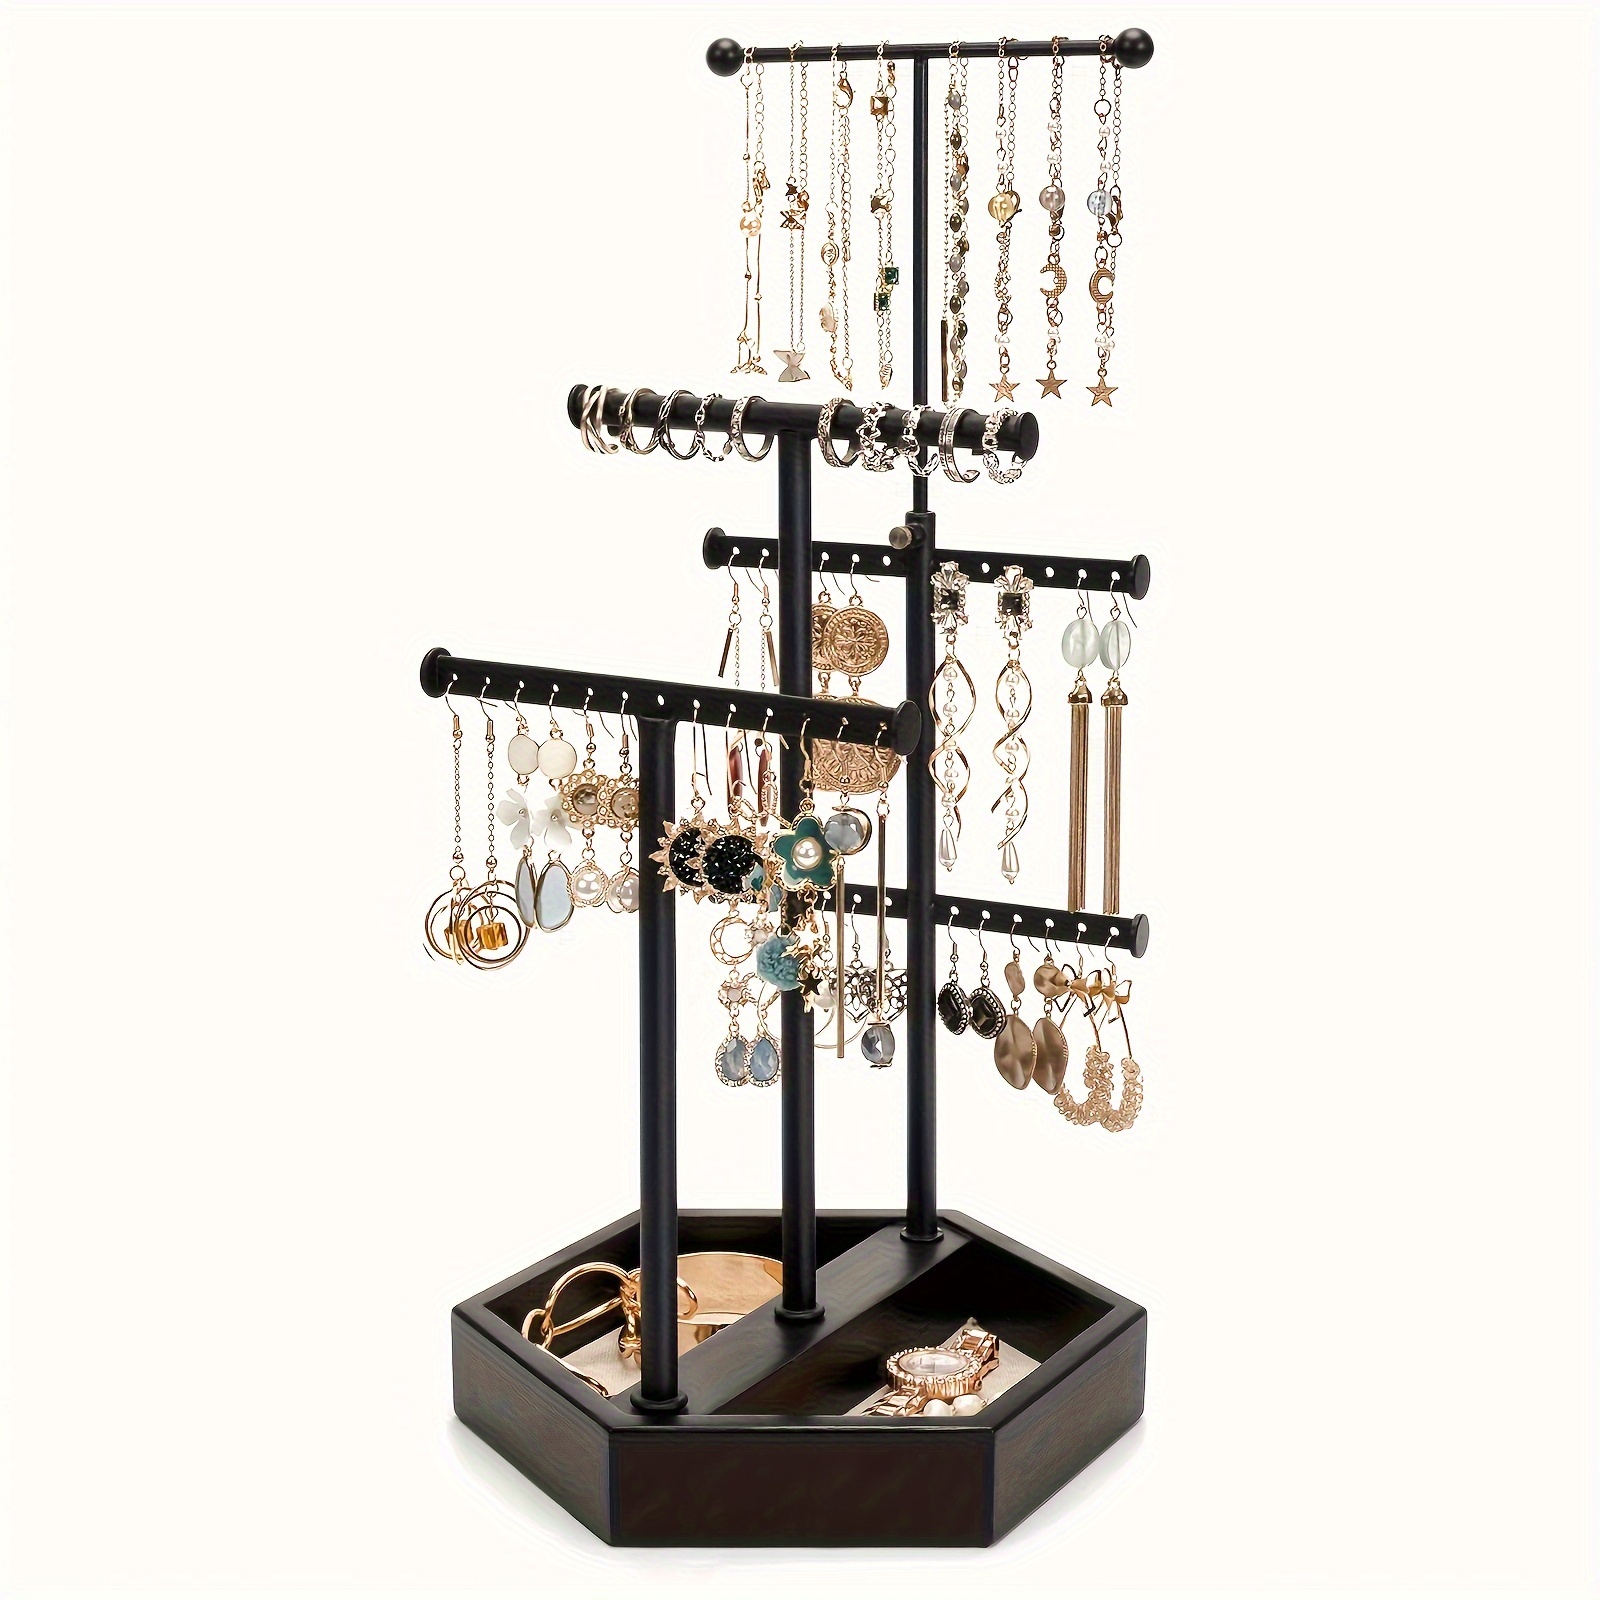 Love-KANKEI Love-Kankei Jewelry Organizer Stand Metal Wood Base And Large  Storage Necklaces Bracelets Earrings Holder Organizer Black And W